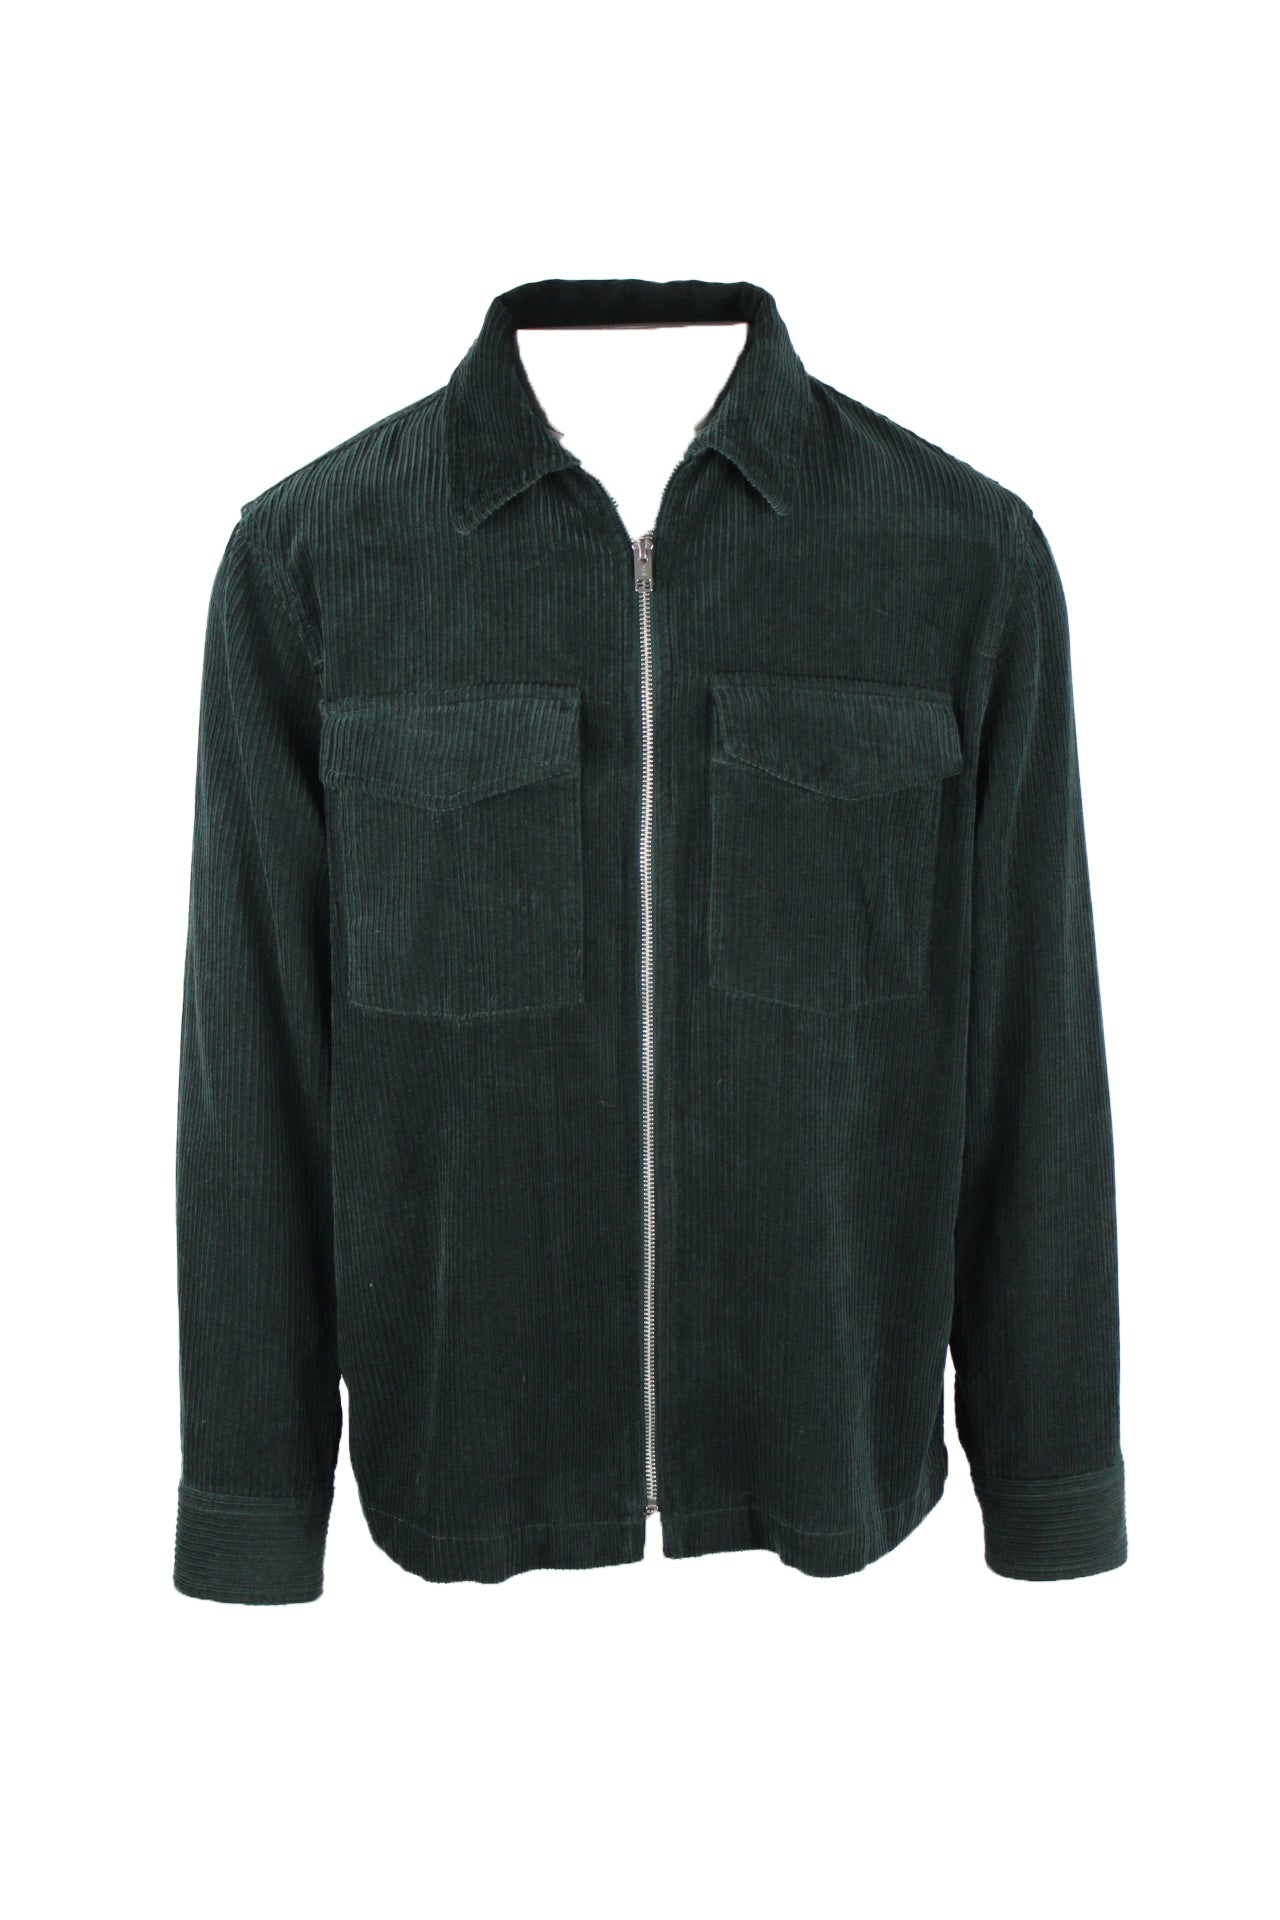 description: h&m green corduroy shirt jacket. features silver-tone metal zipper closure at center front, cuffed long sleeves, and pressure fastener closure flap pockets at front.